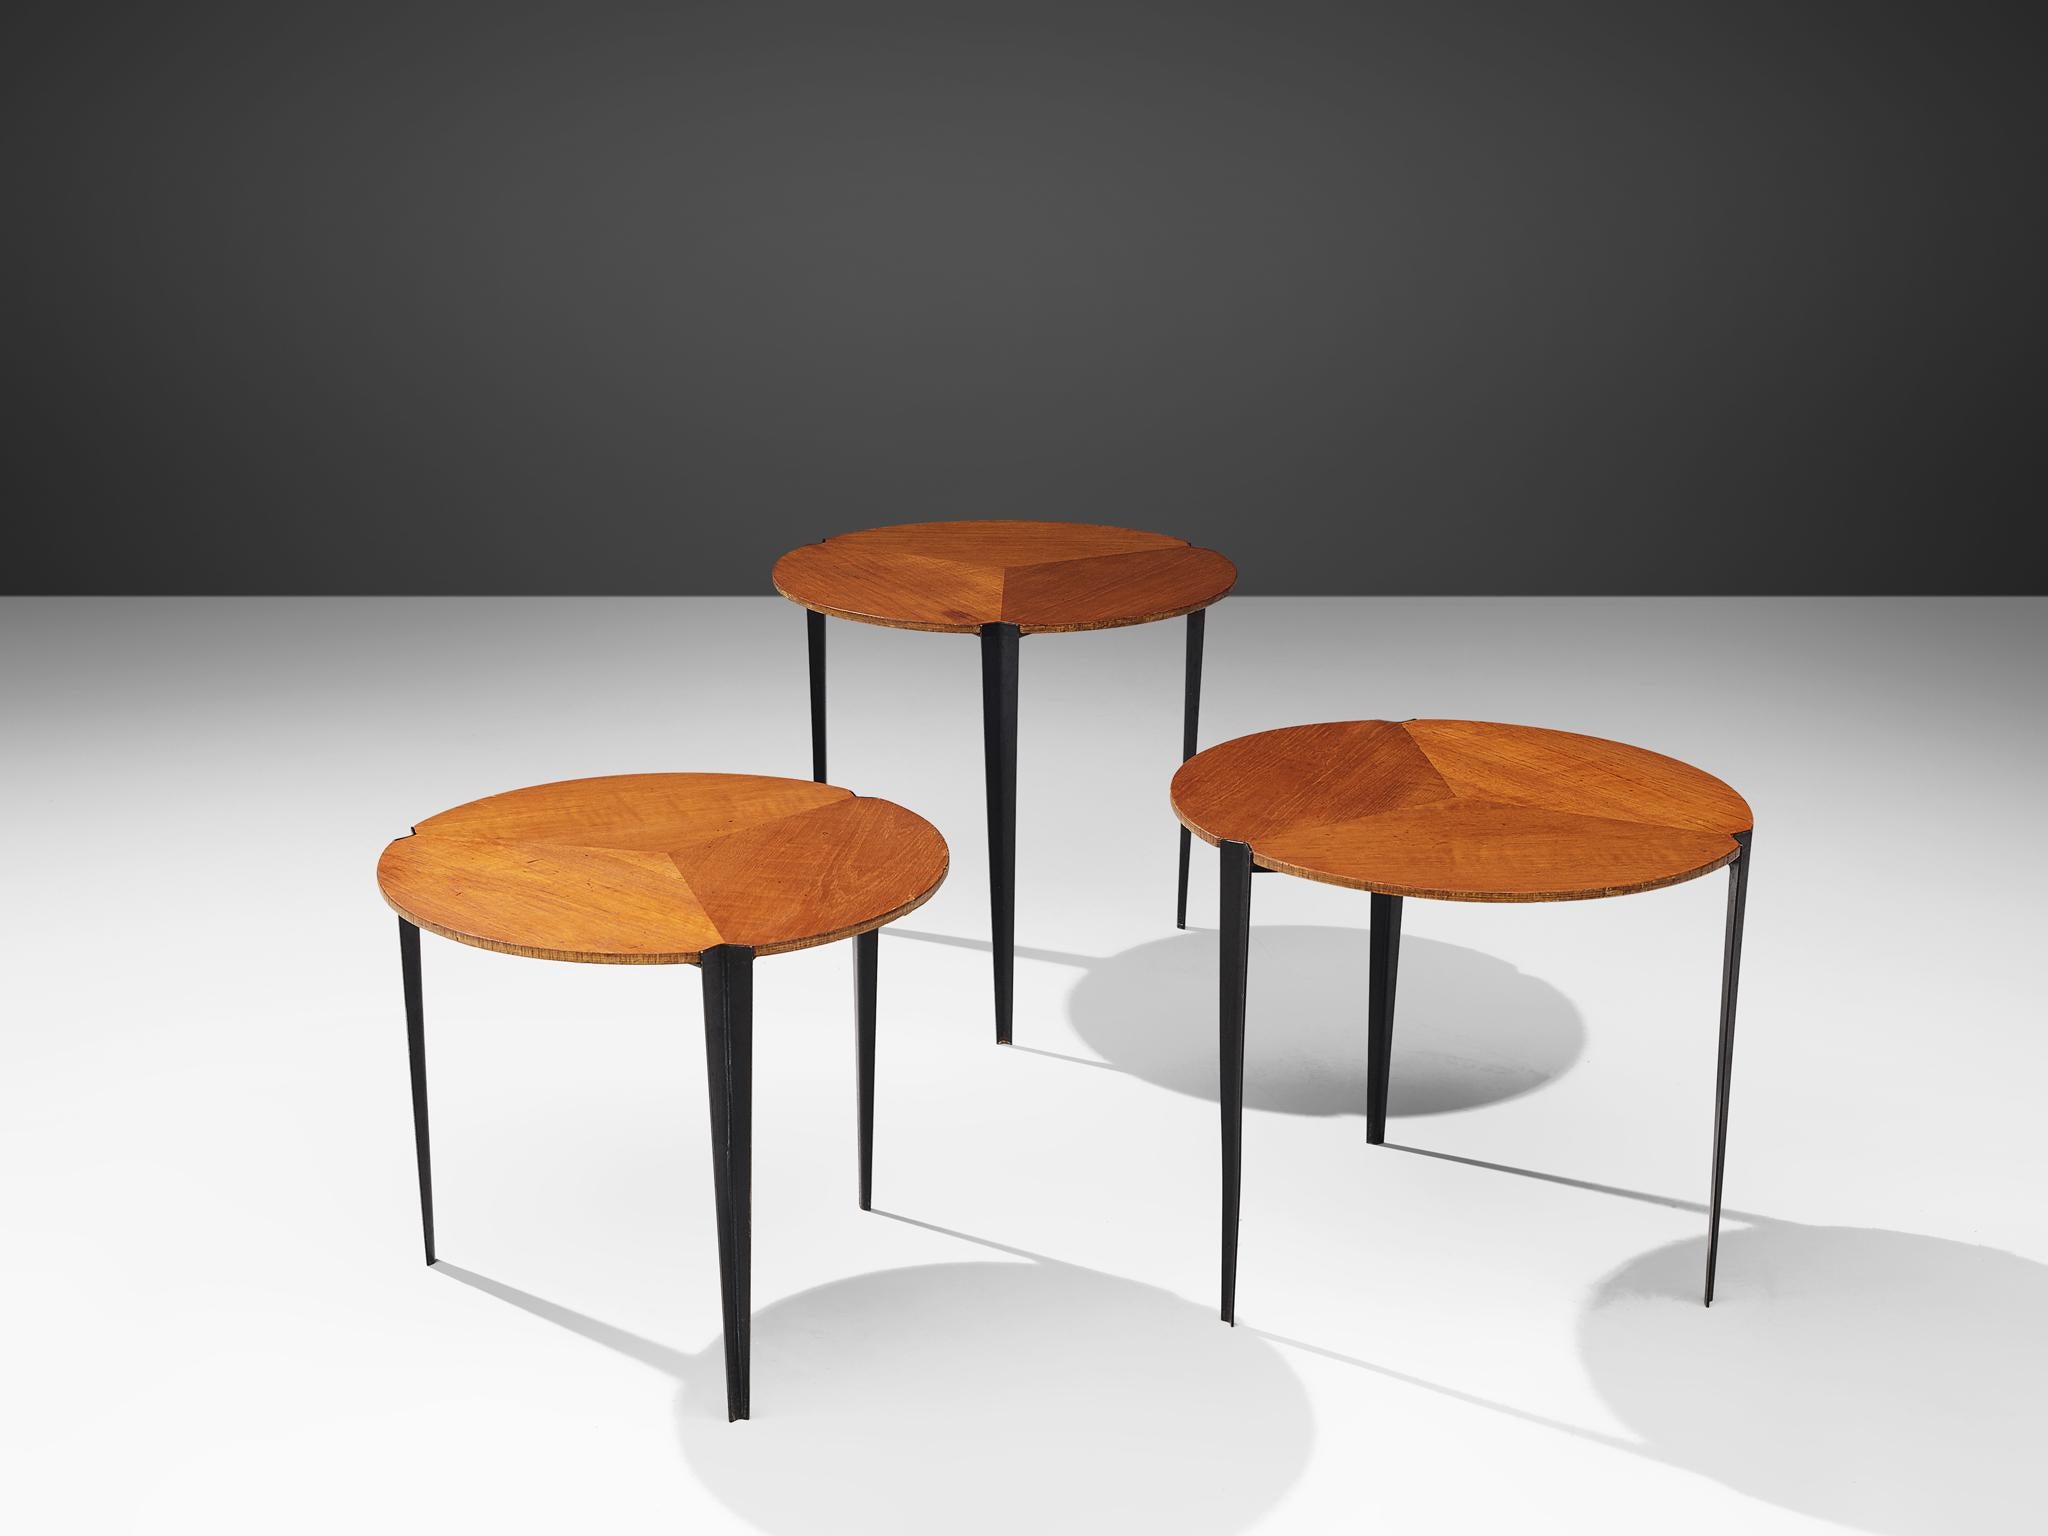 Osvaldo Borsani for Tecno, set of three nesting tables model 'T61', teak and metal, Italy, 1957

Elegant set of three nesting tables, designed by Osvaldo Borsani and produced by Tecno. Each table has a circular table top of teak veneer, that is